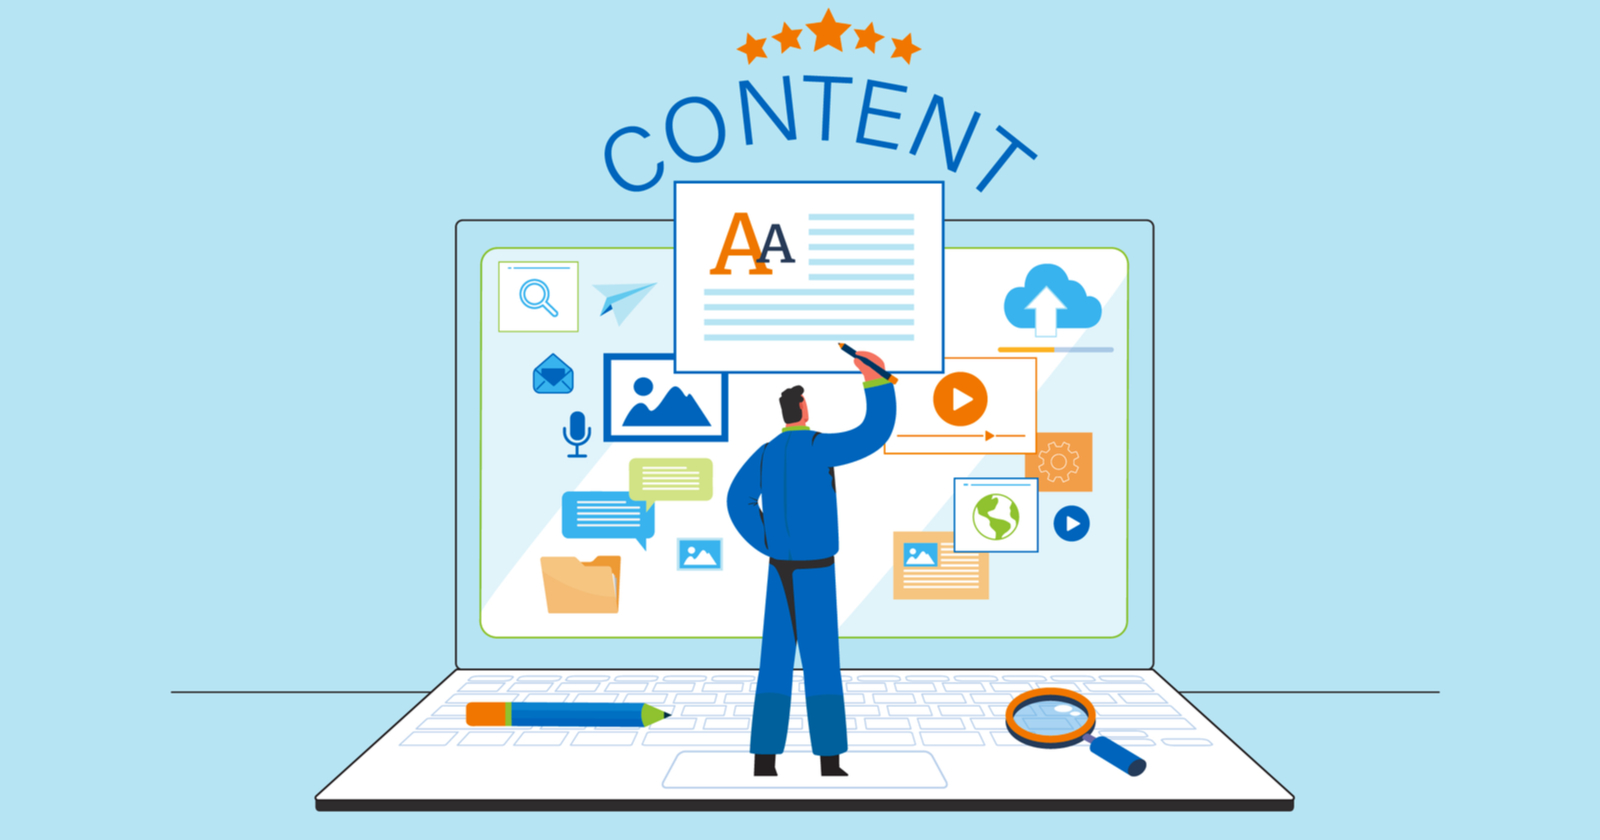 Is SEO content different from general content?